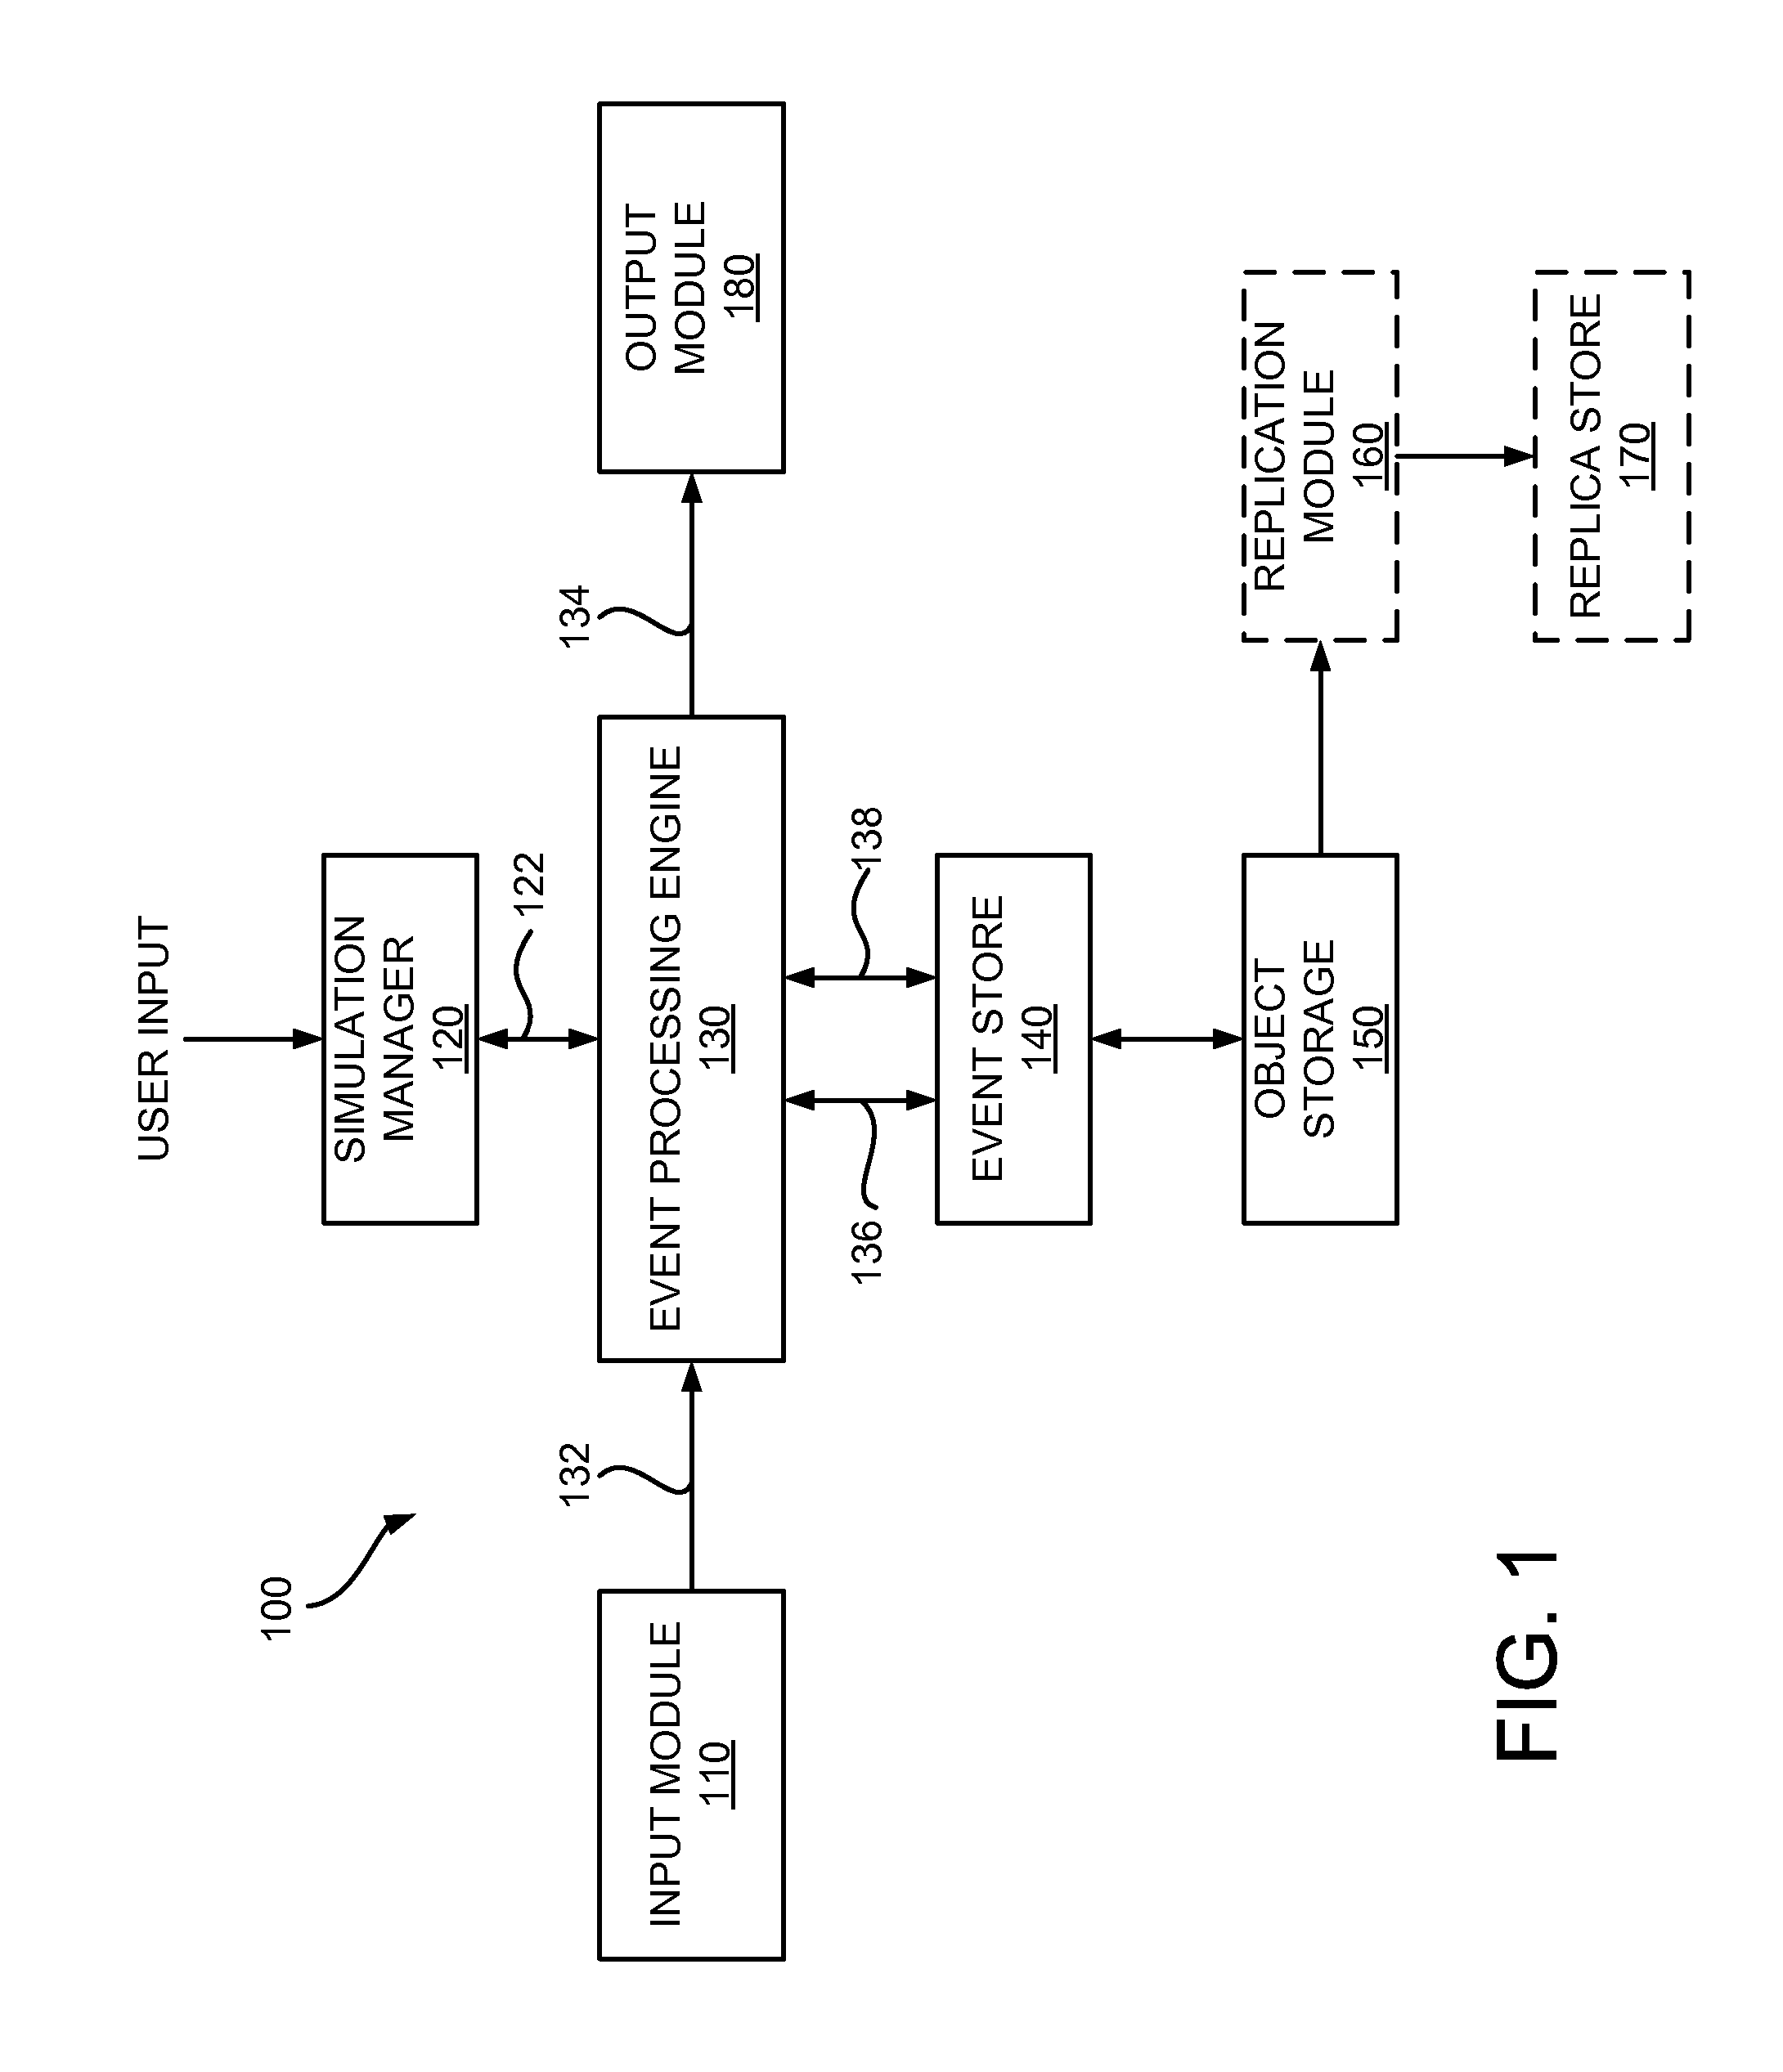 Non-intrusive event capturing for event processing analysis